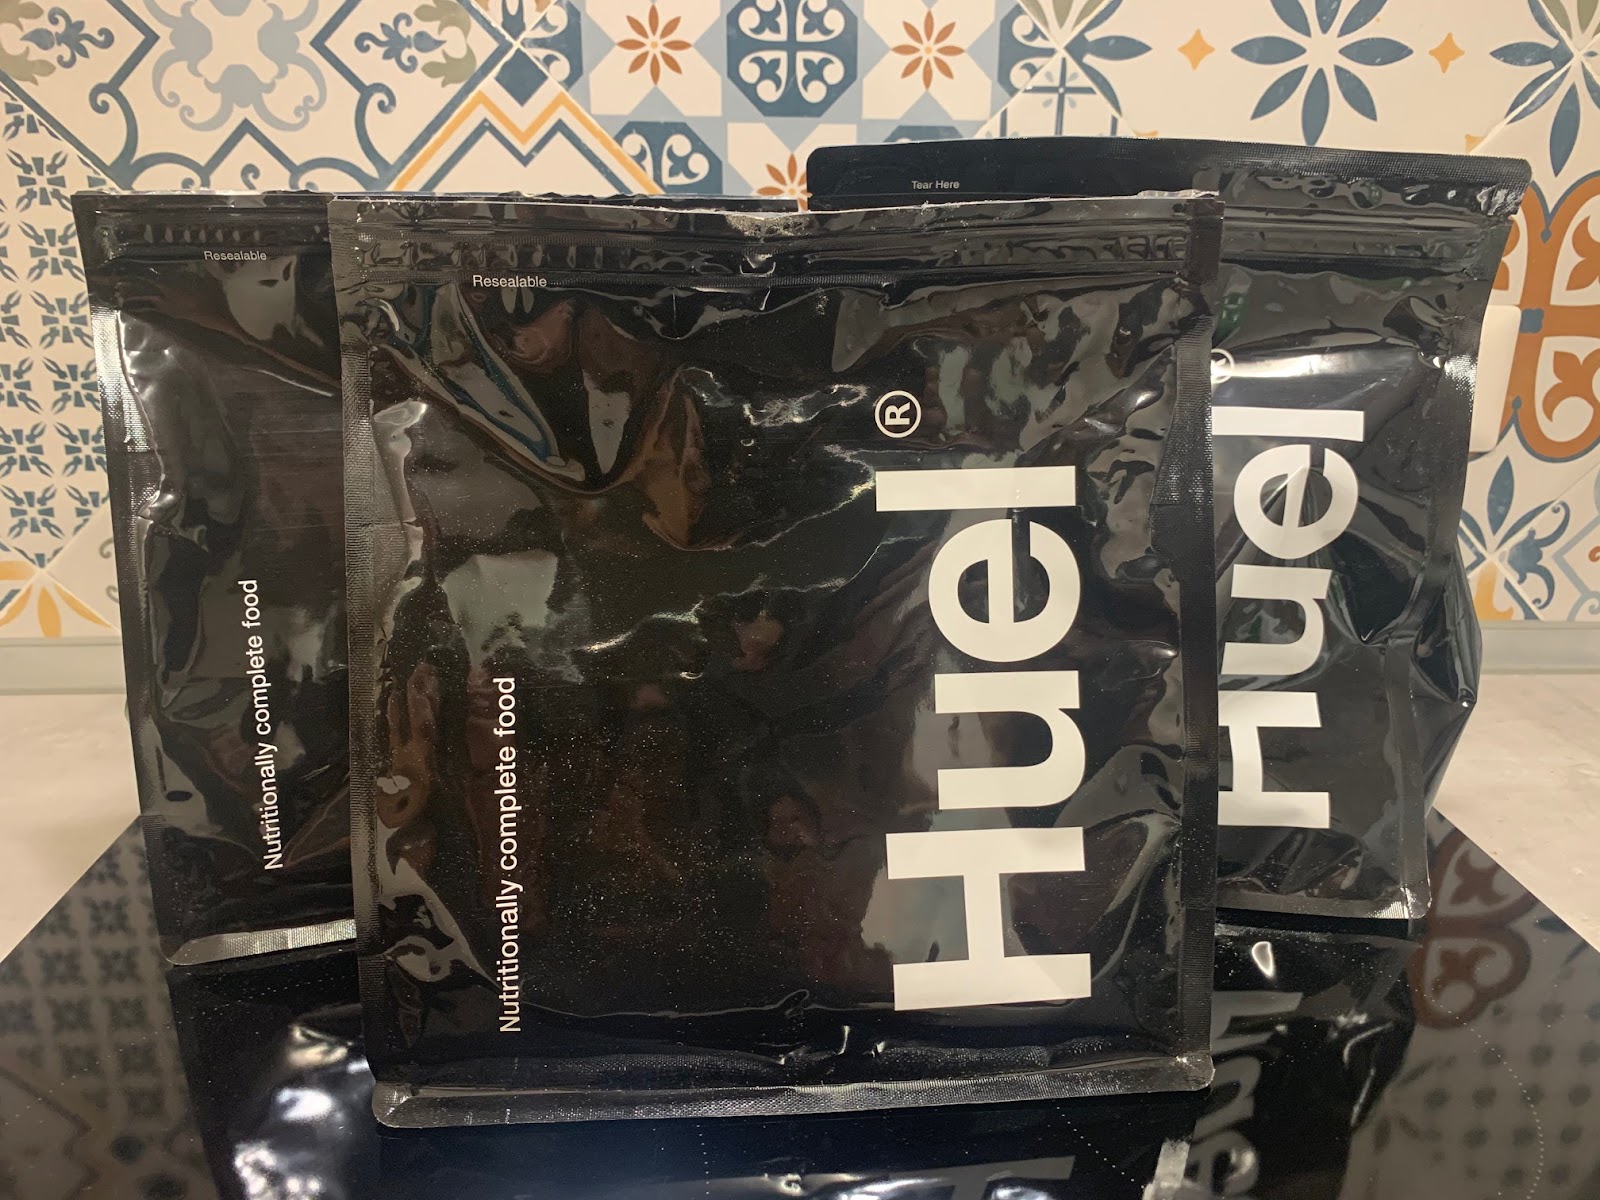 Huel Review: The Best Meal Replacement Option on the Market? 16